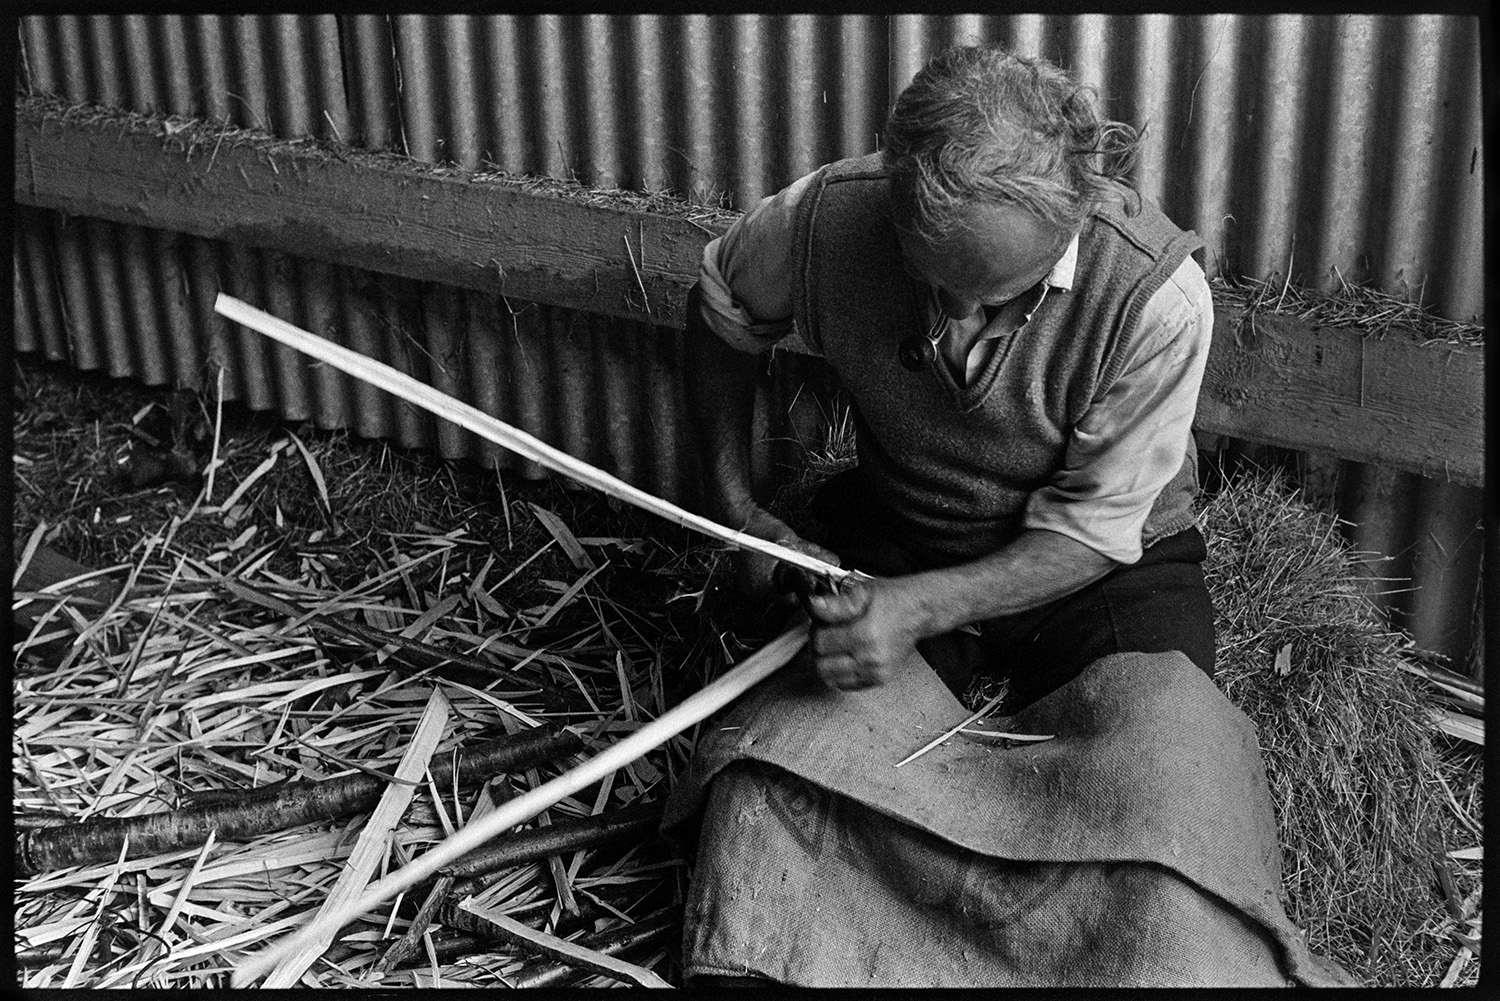 Thatcher cutting spars. 
[Bill Hammond sat on a hay bale by a corrugated iron shed cutting spars for thatching, at Newhouse, Ashreigney. He also has a hessian sack covering his knees.]